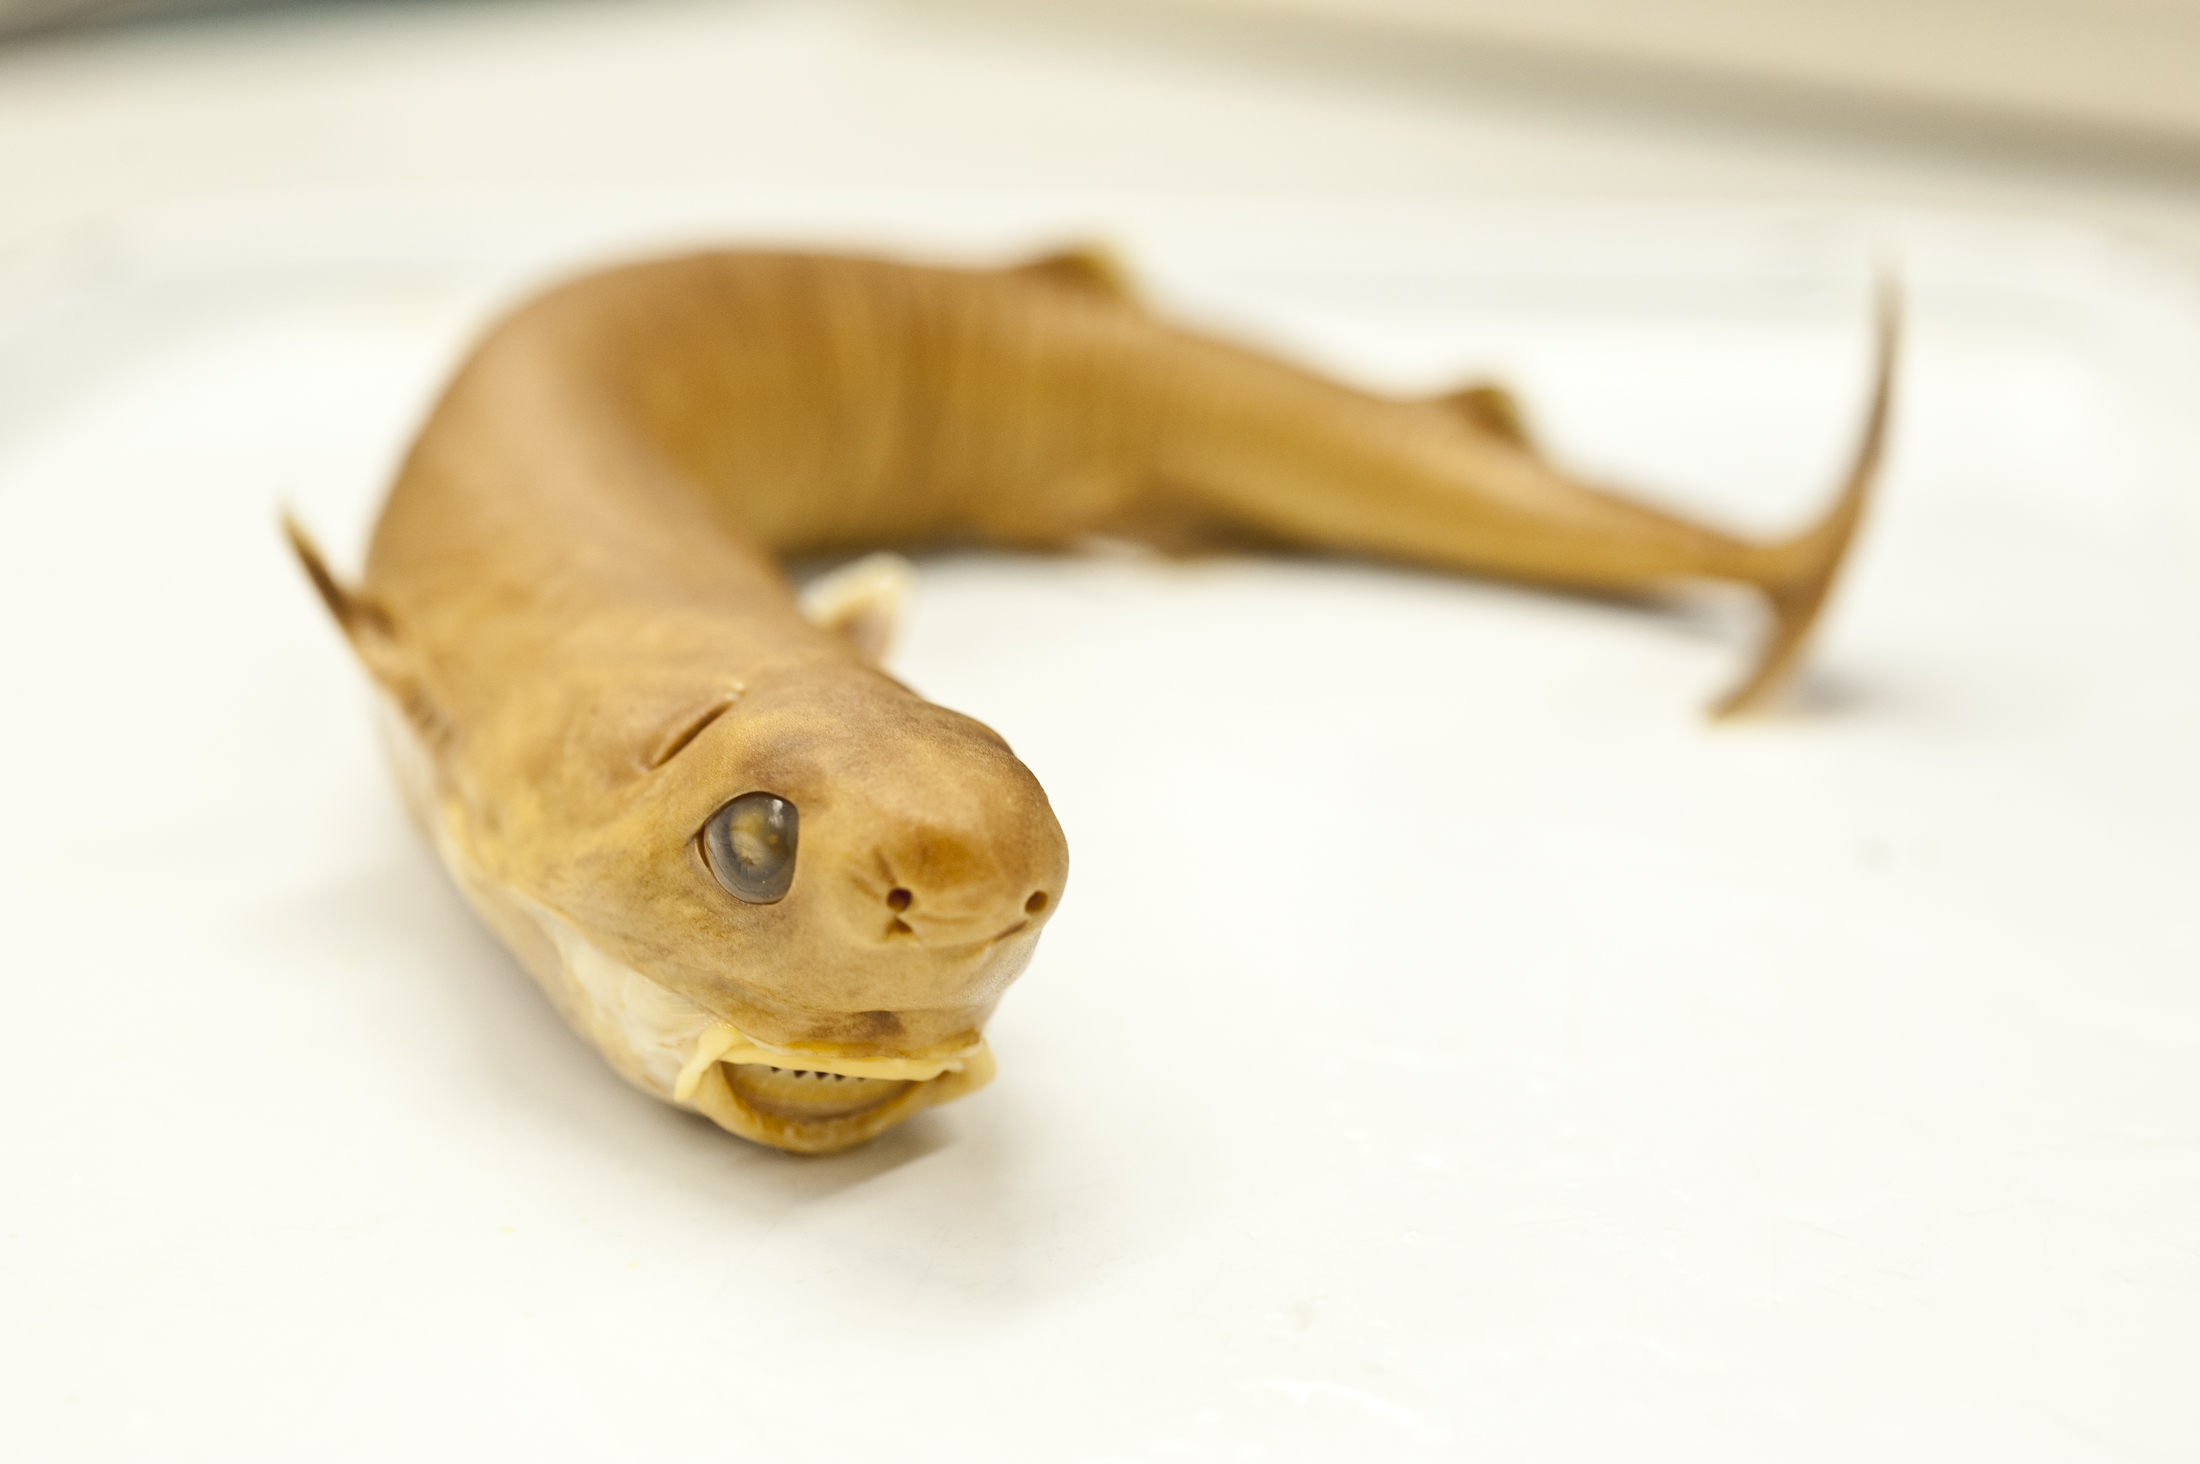 The yellow-colored cookiecutter shark is long and thin, with small fins along its back and sides. Its eyes are cloudy and its mouth has many sharp-looking teeth